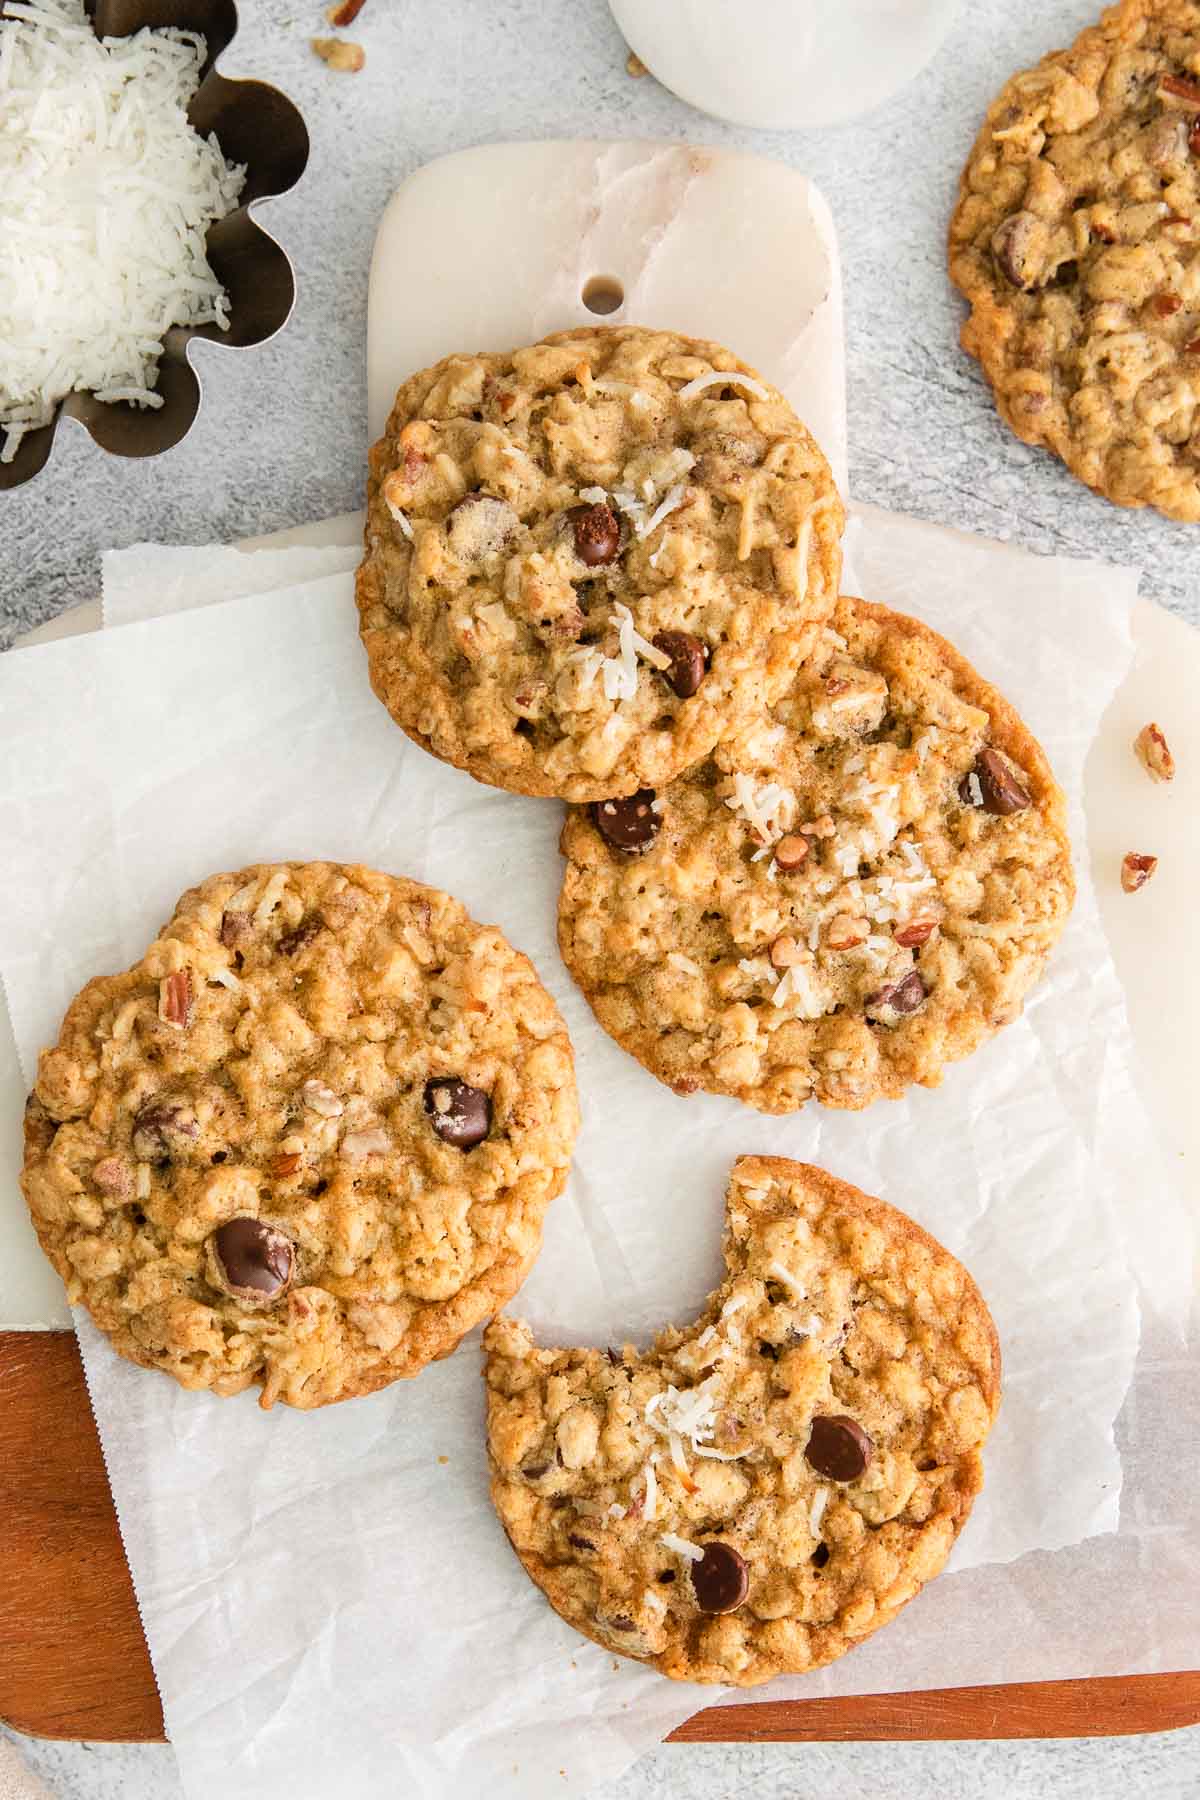 five cowboy cookies with chocolate chips, oats, pecans and shredded coconut.